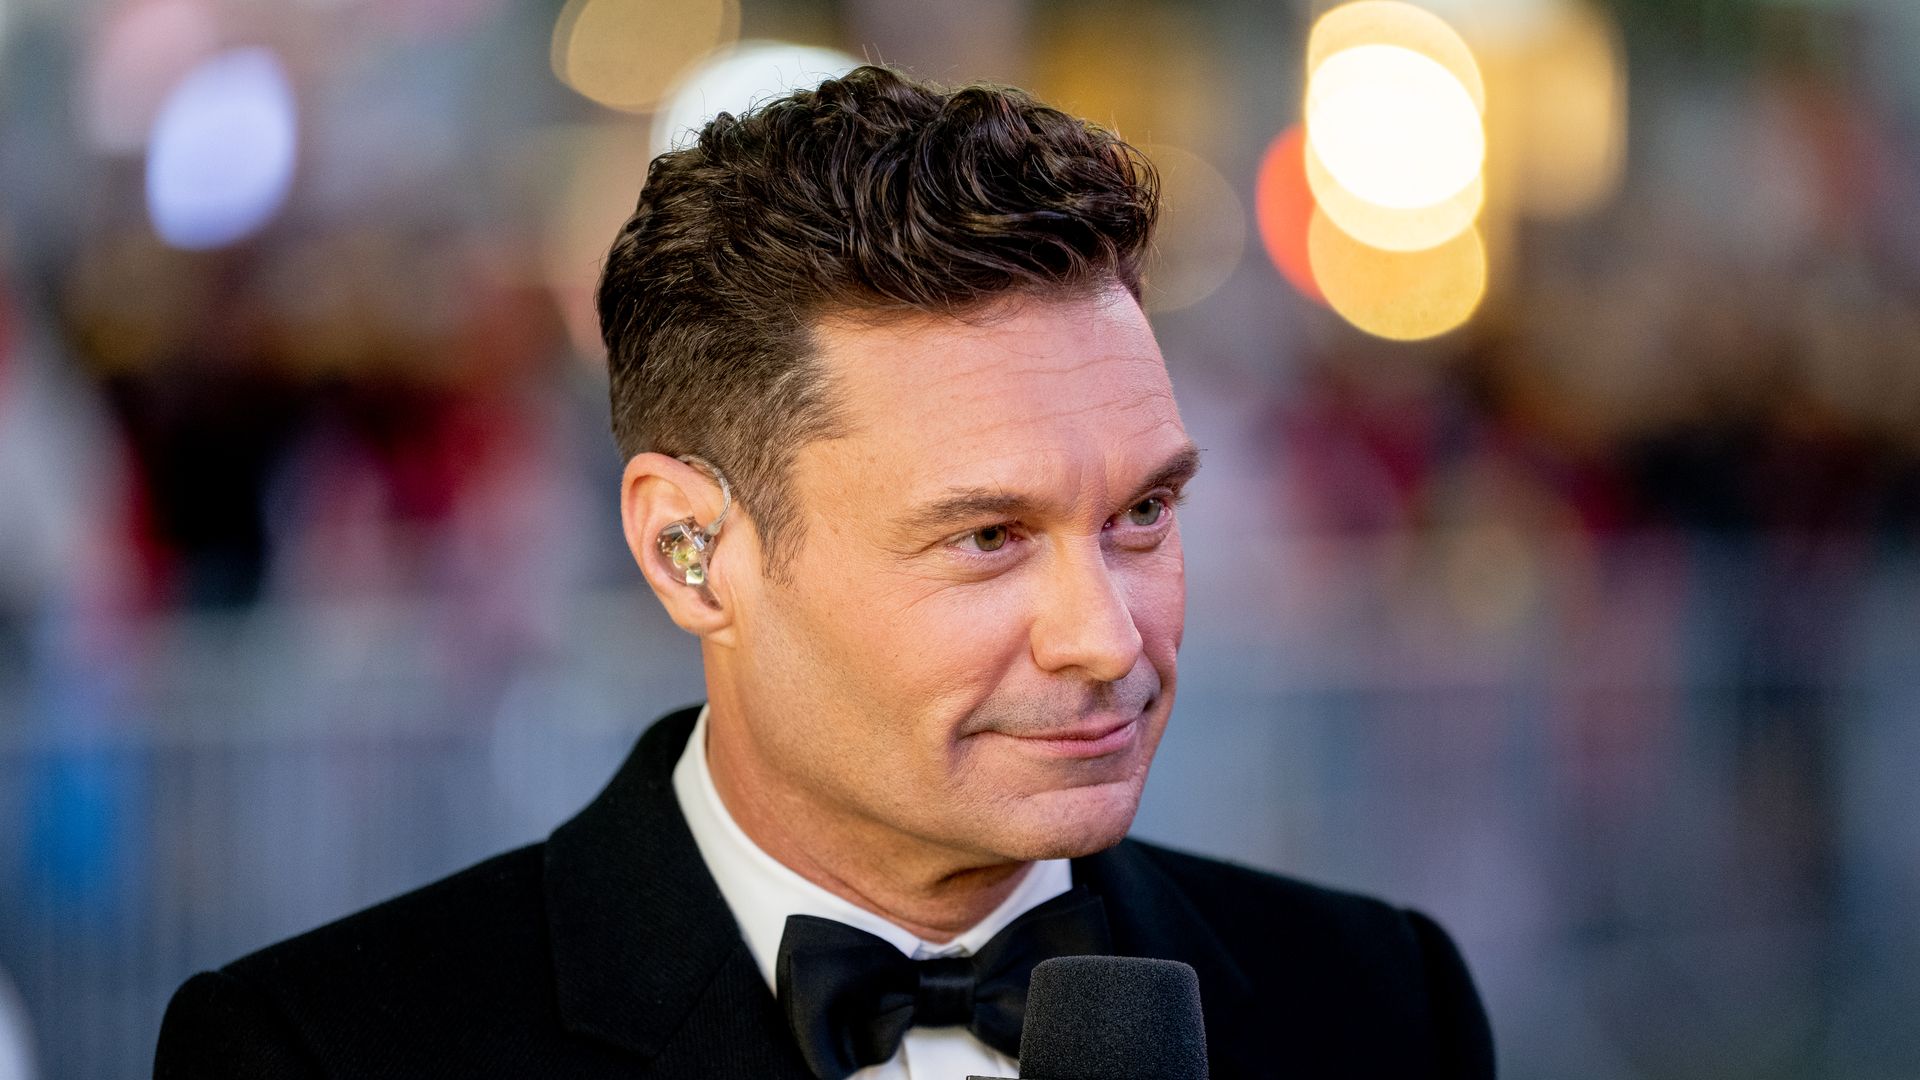 Ryan Seacrest hosts the Times Square New Years Eve Celebration in 2021